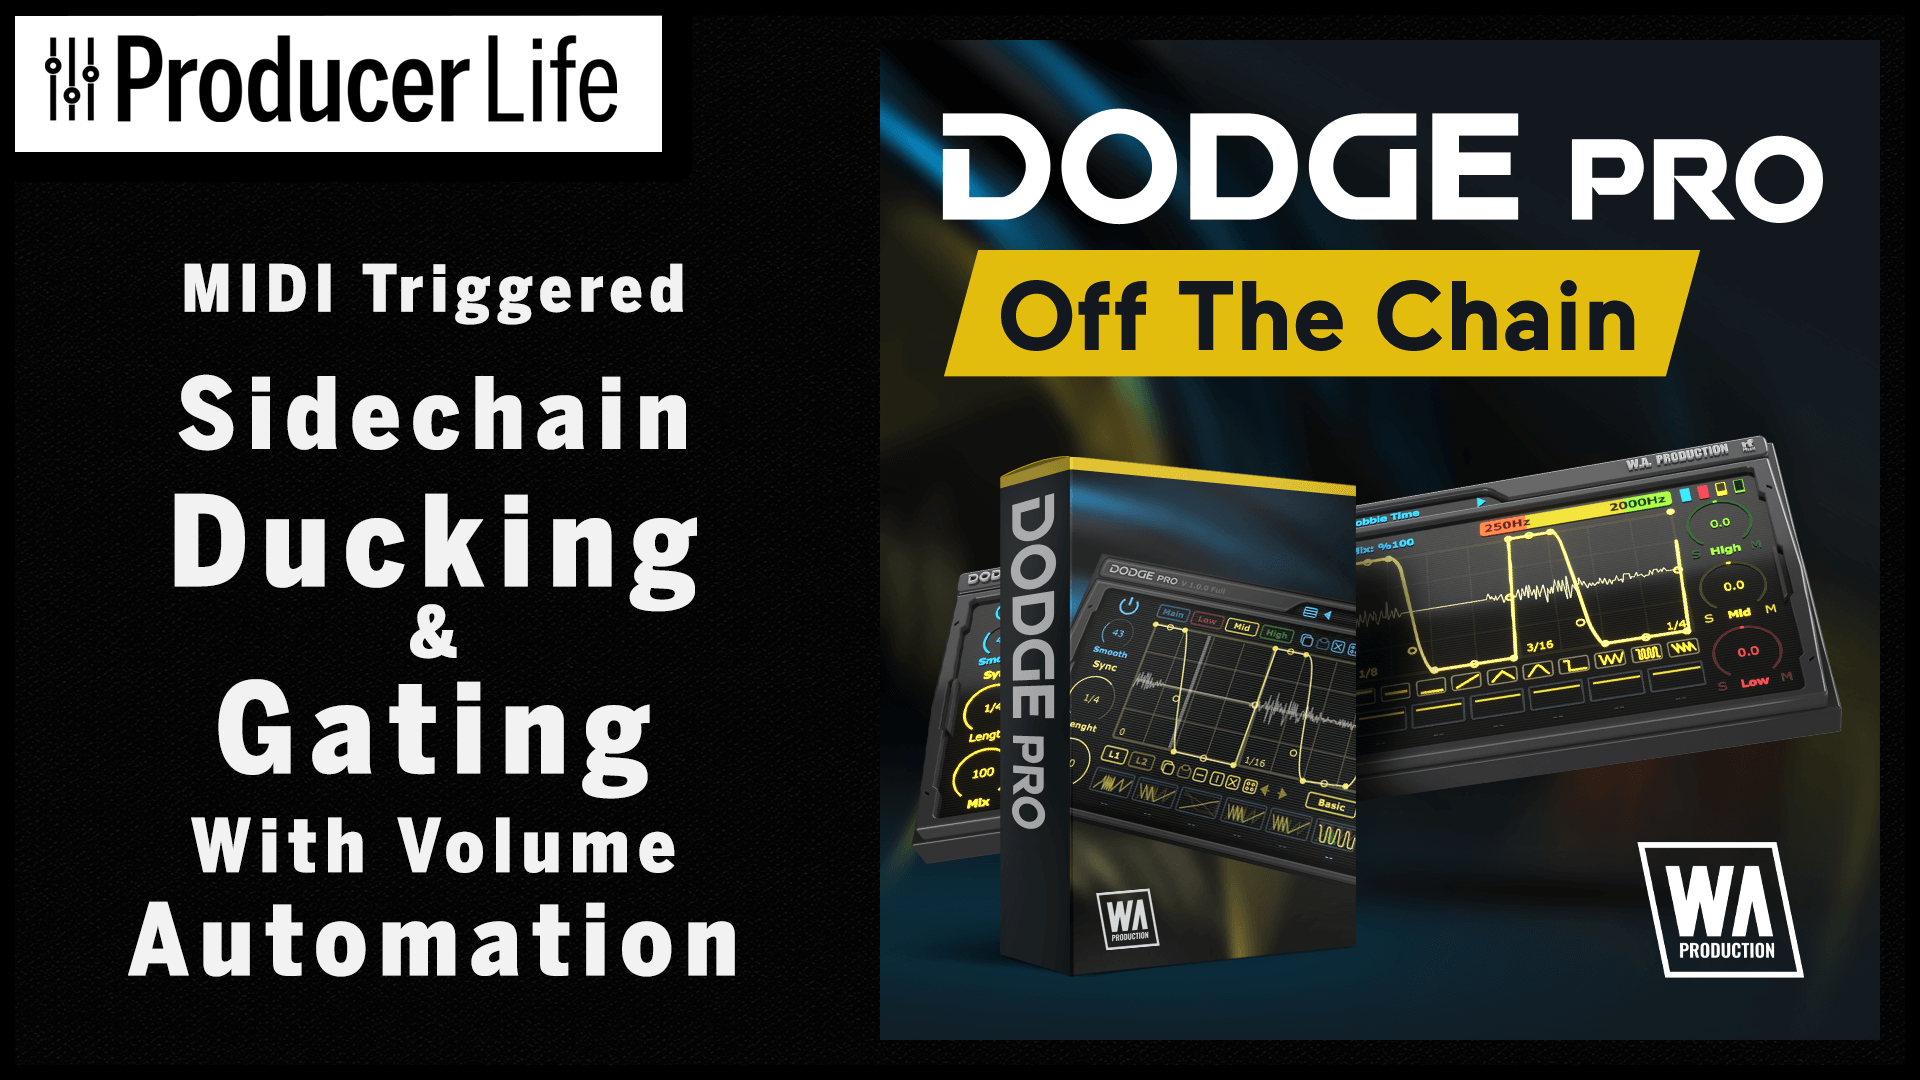 Dodge Pro by WA Production October 6, 2021 Plugins https://producerlife.co.uk/dodge-pro-by-wa-production/